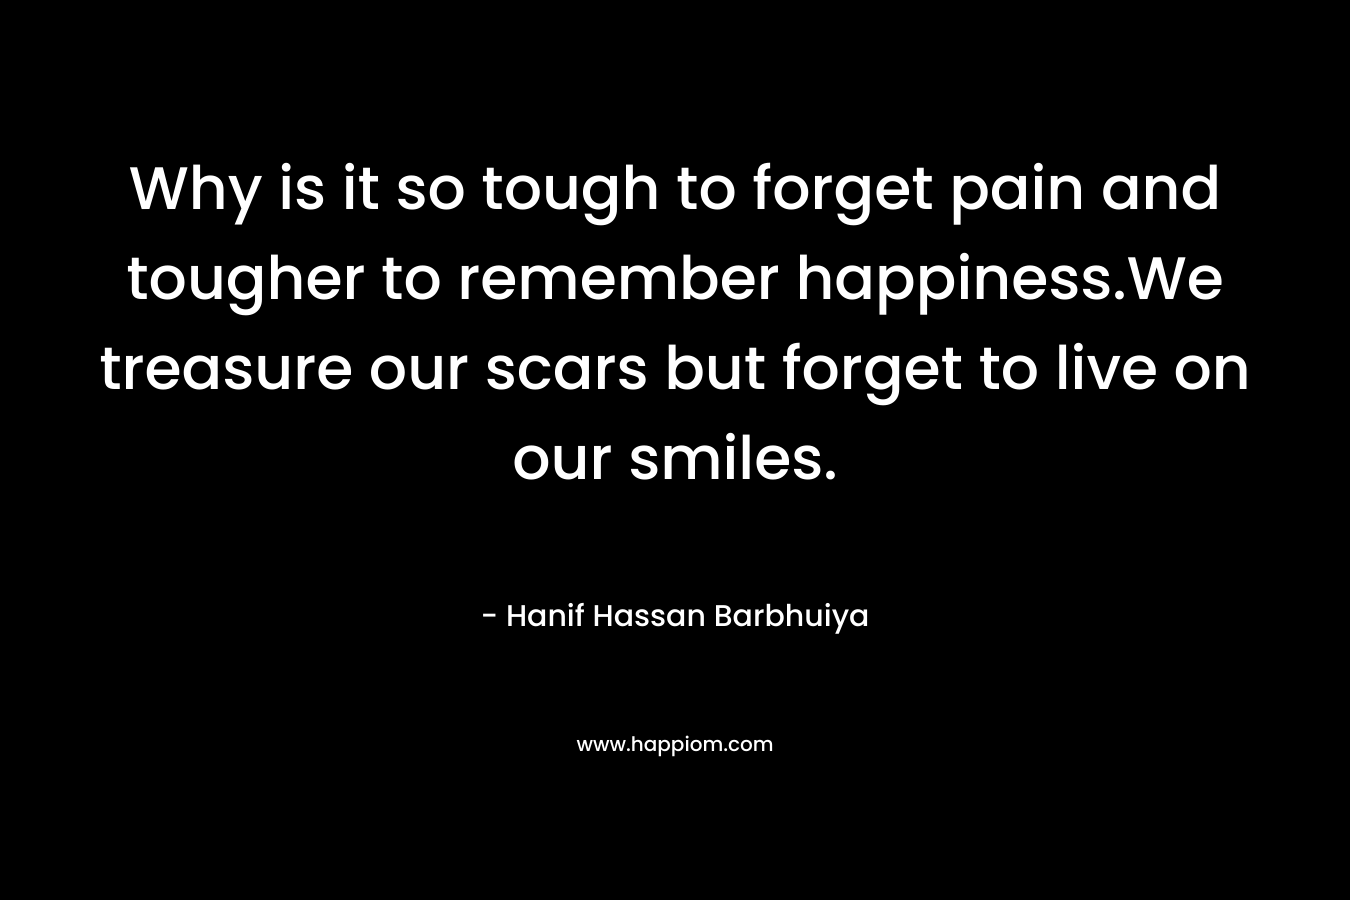 Why is it so tough to forget pain and tougher to remember happiness.We treasure our scars but forget to live on our smiles. – Hanif Hassan Barbhuiya